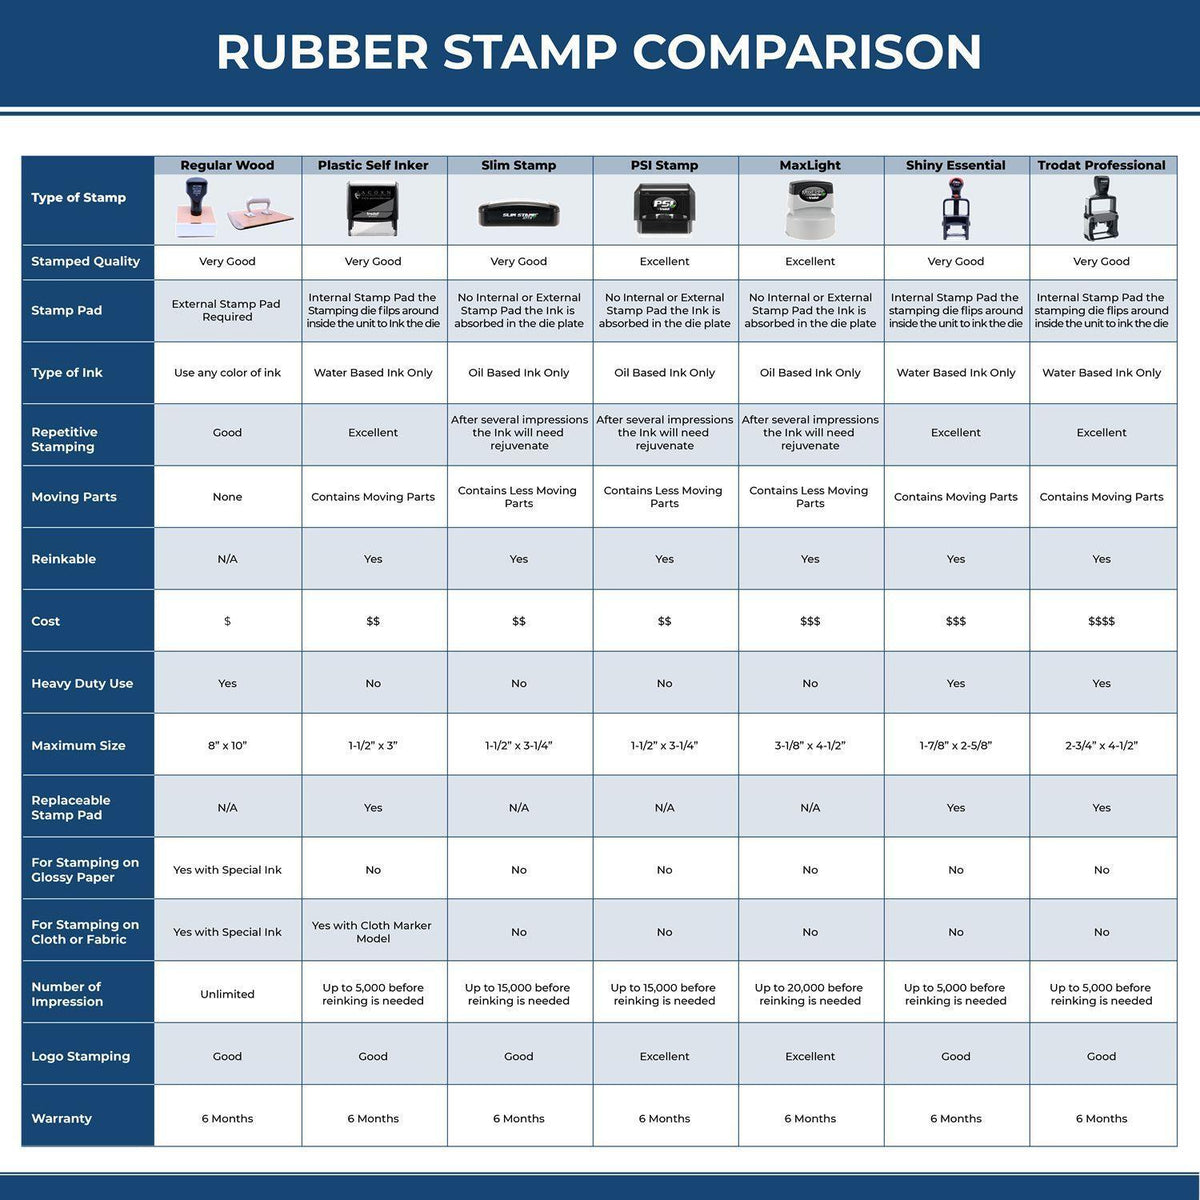 Large Narrow Font Non-Smoker Rubber Stamp 4925R Rubber Stamp Comparison